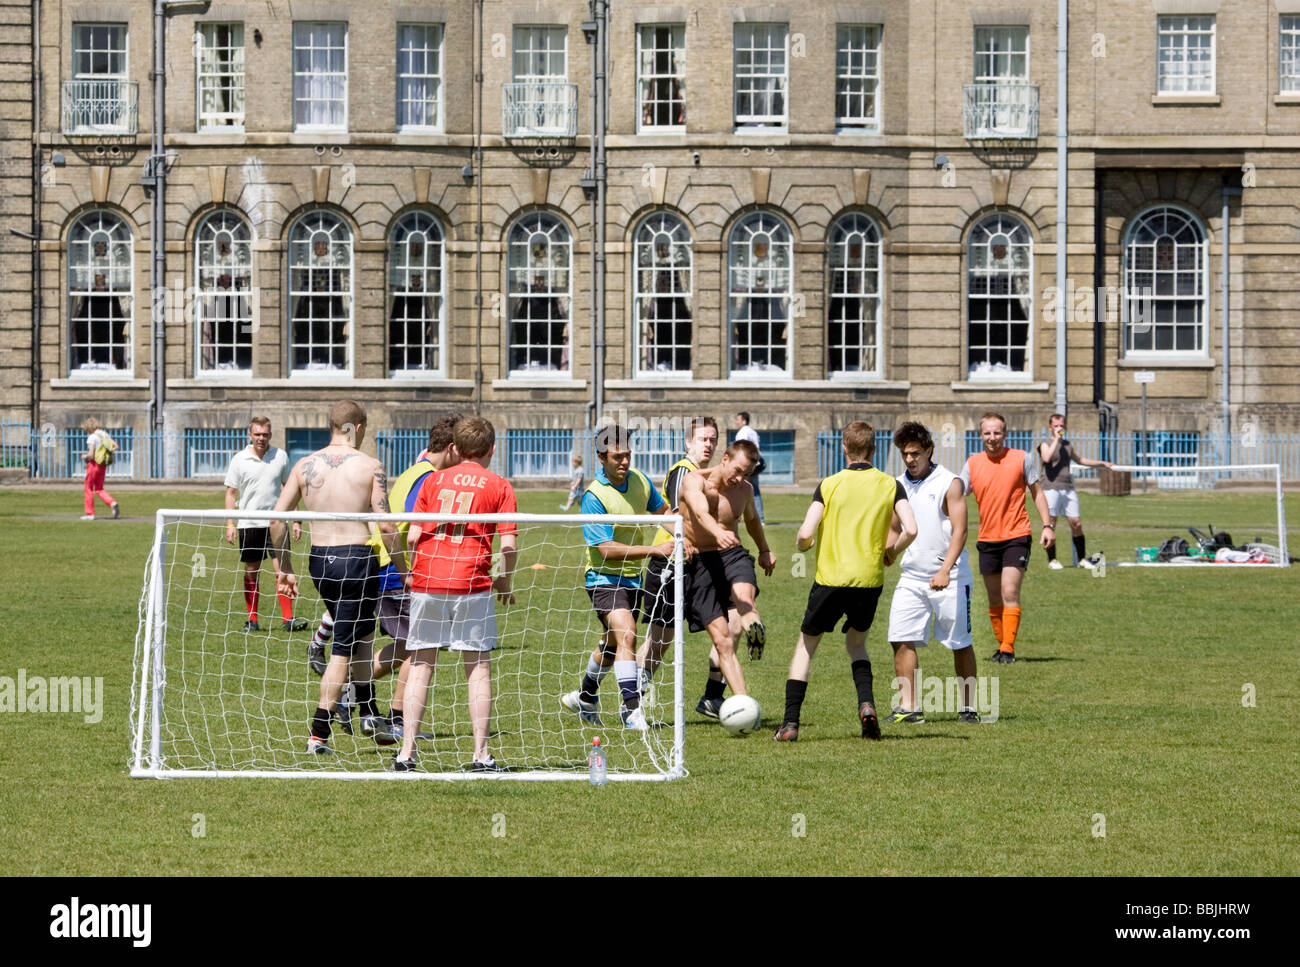 Teenagers playing football in front of the University Arms Hotel on Parkers Piece, Cambridge, UK Stock Photo